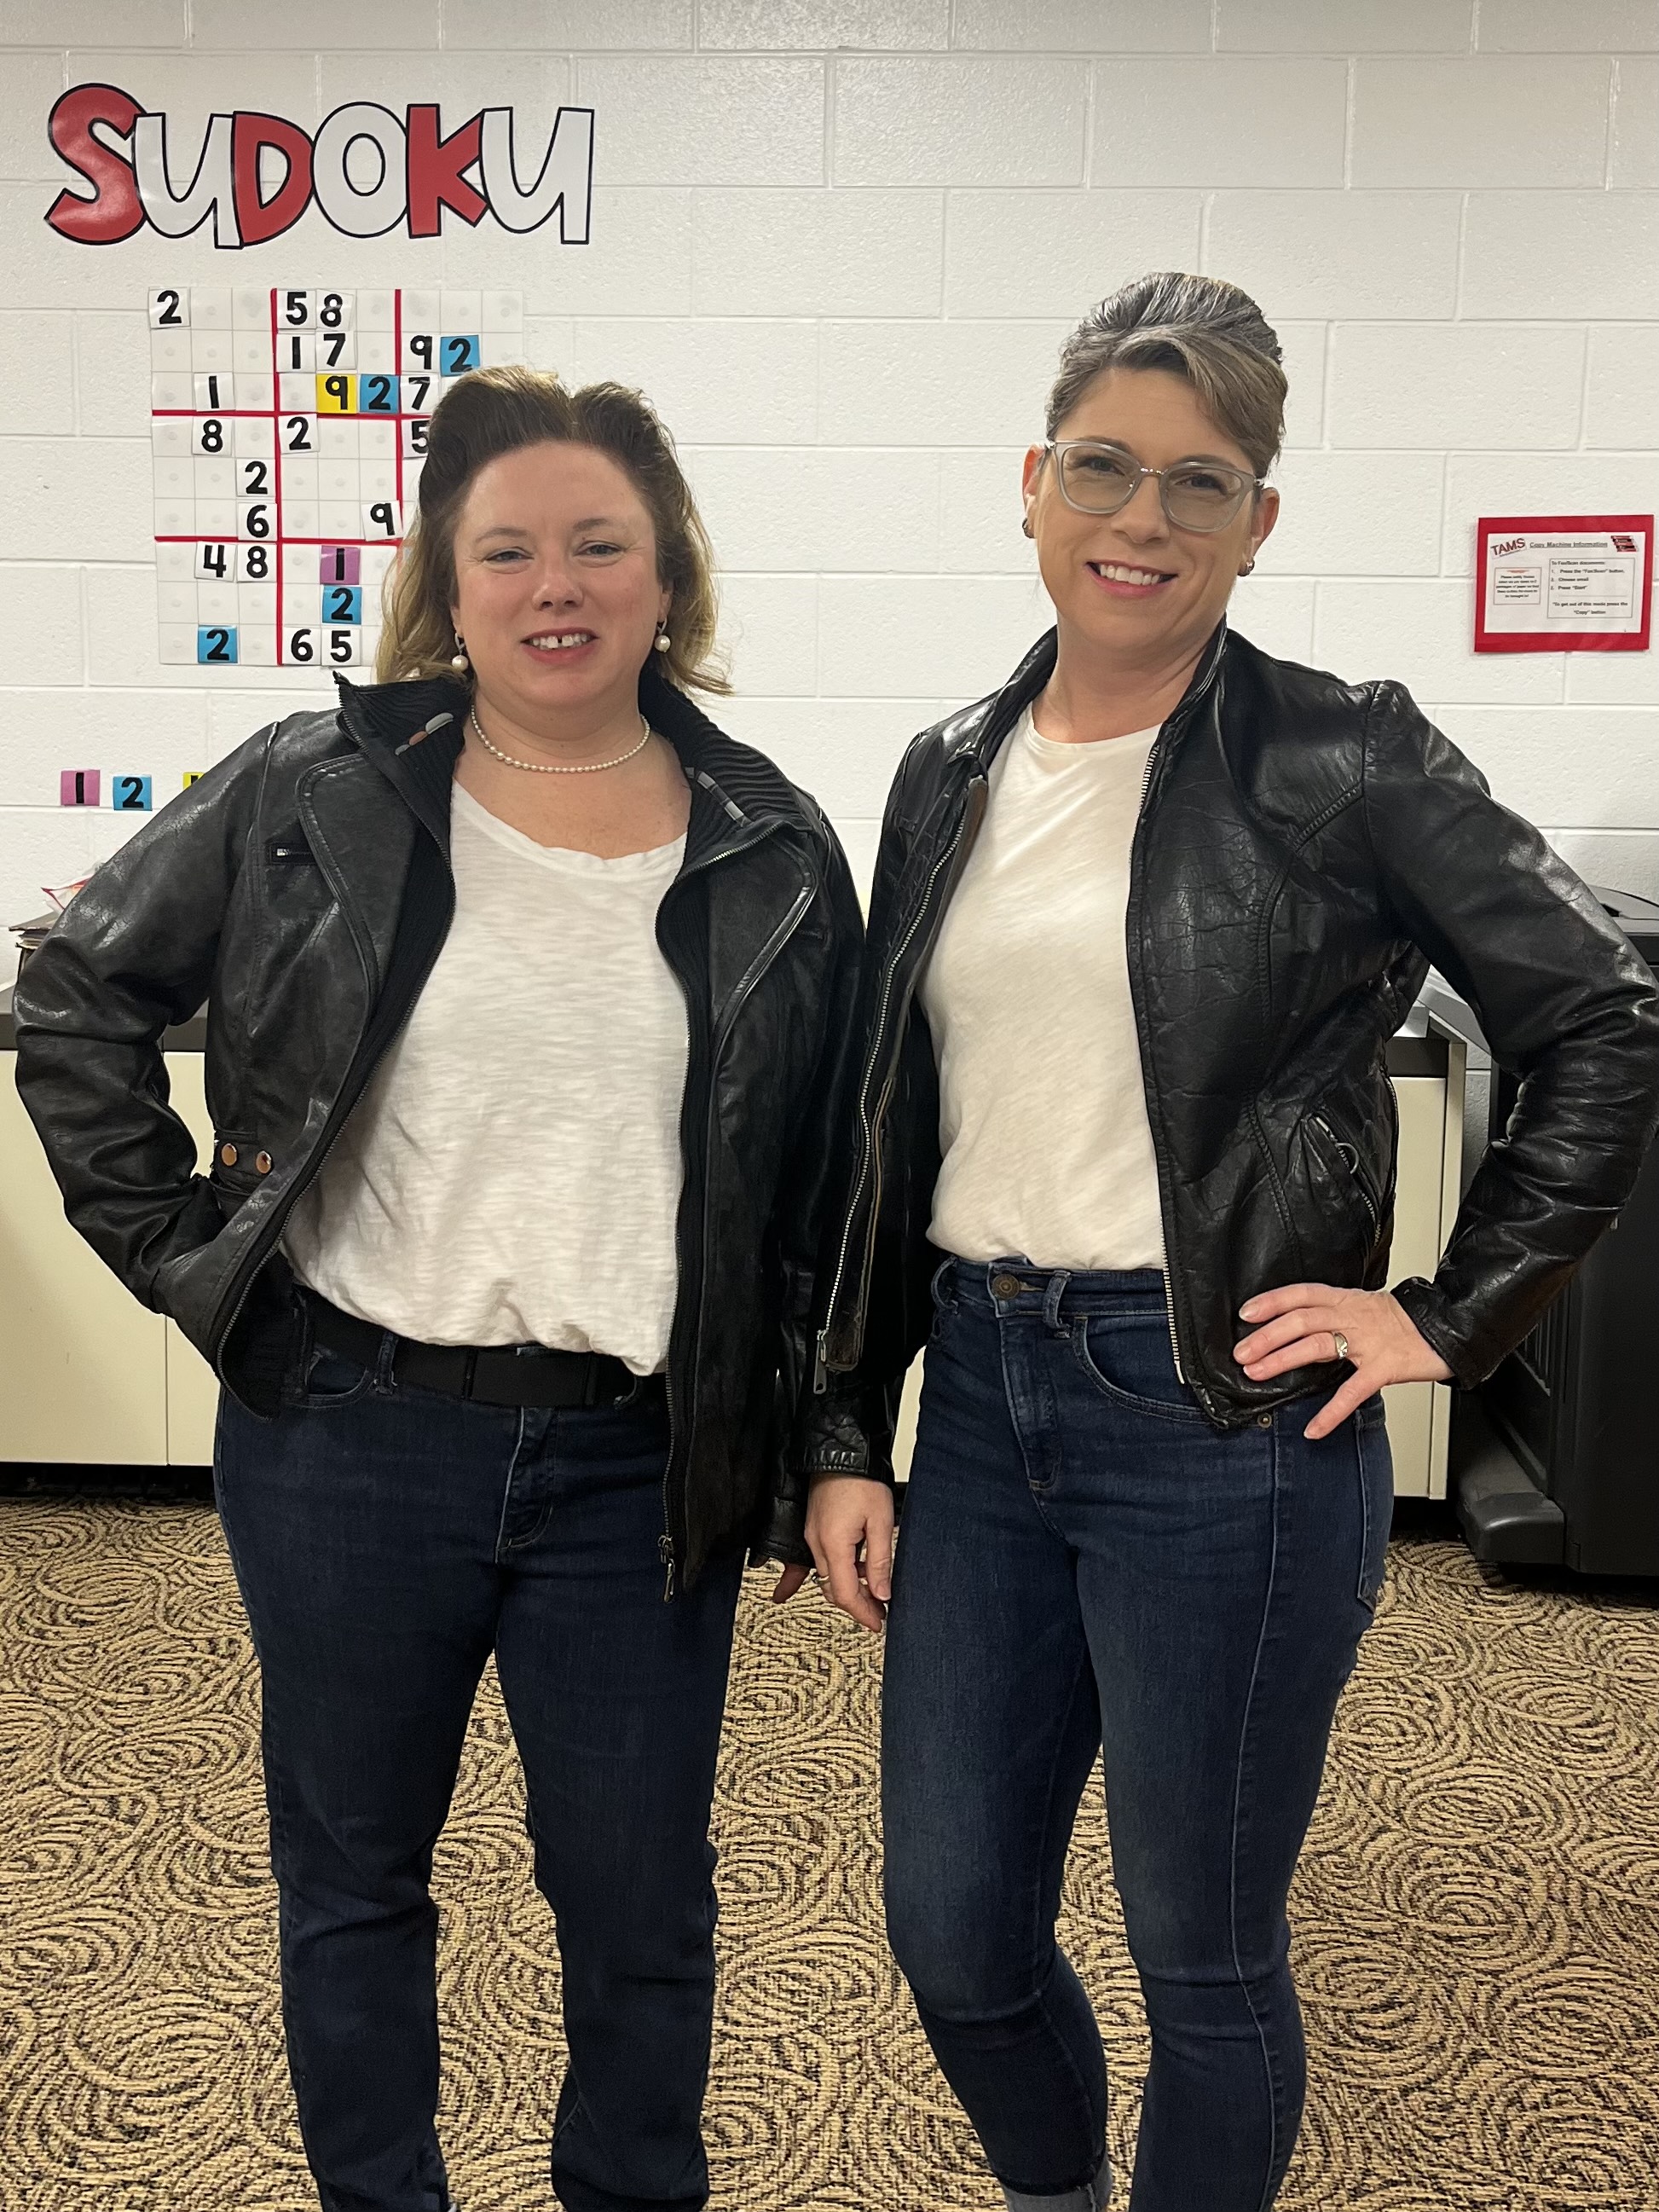  dressed up as 50's